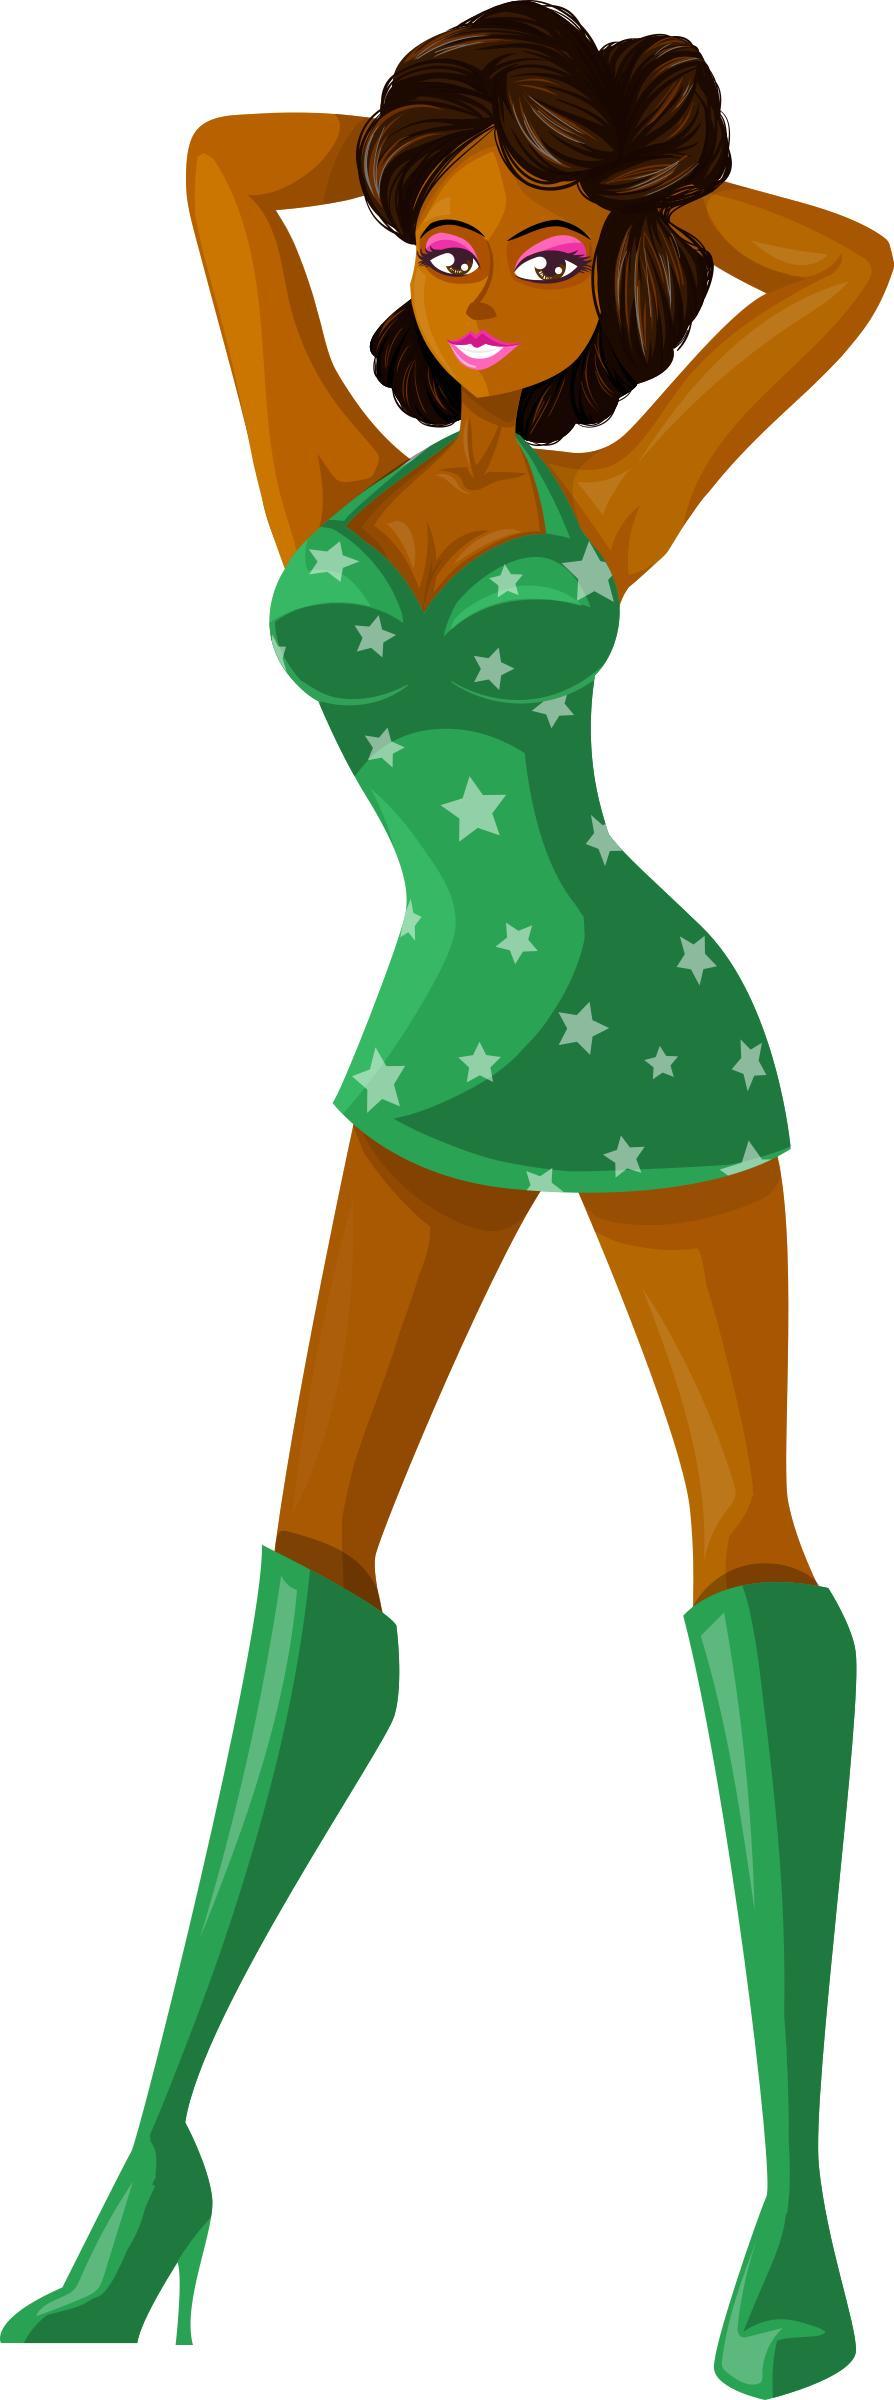 Young lady 2 (brown hair, dark skin, starry dress #4) png transparent